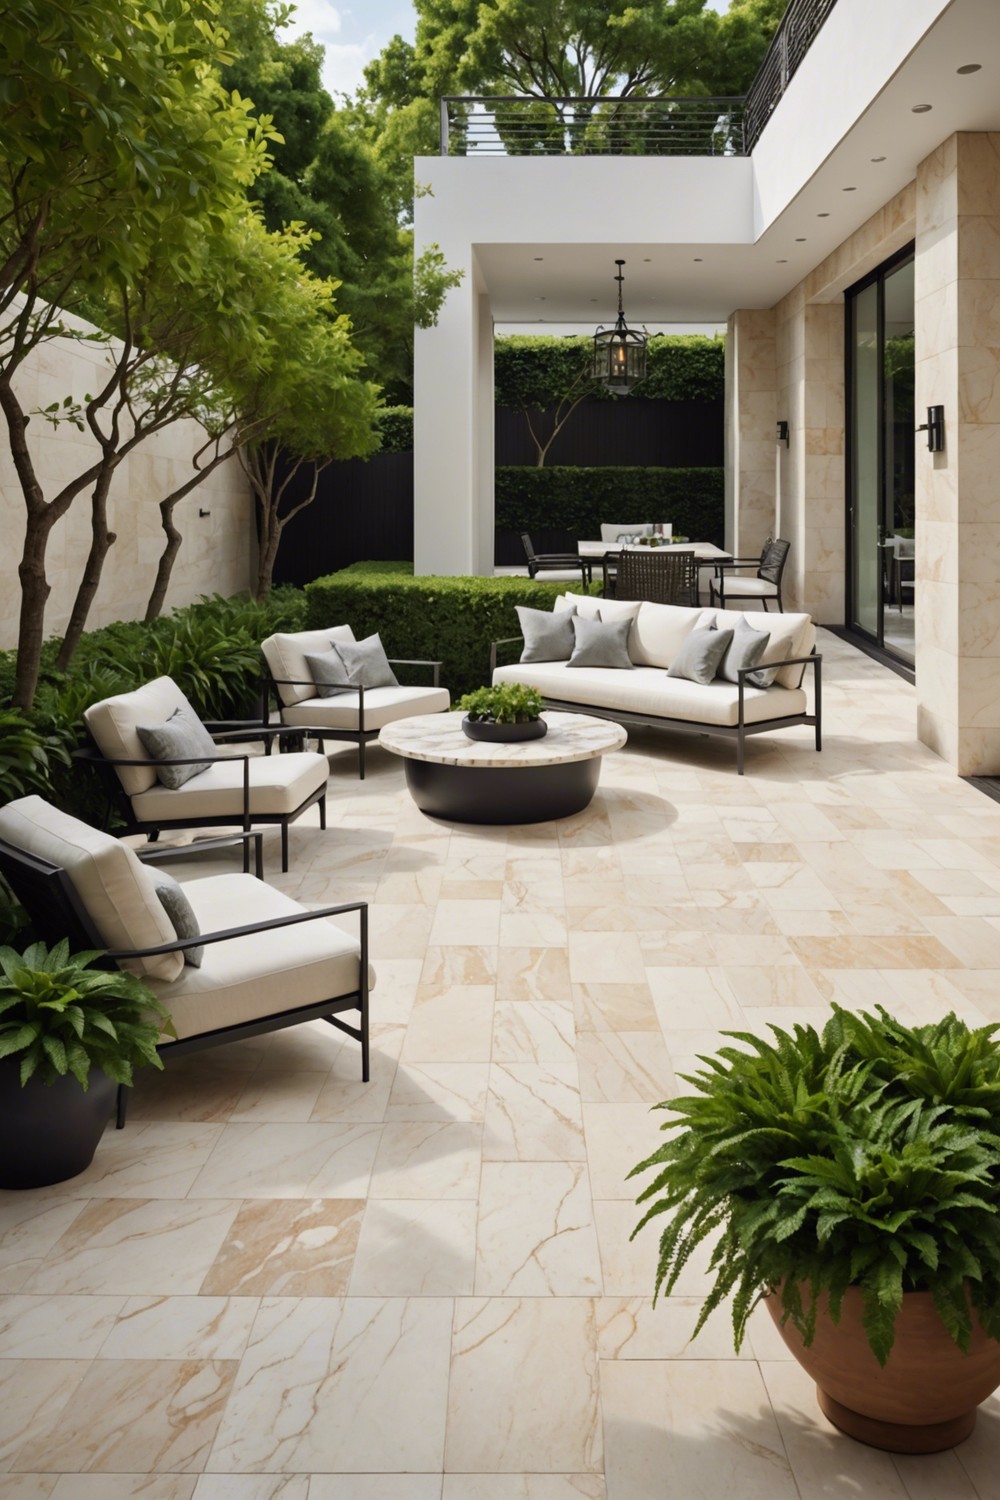 Marble Tiles for a Sophisticated Patio